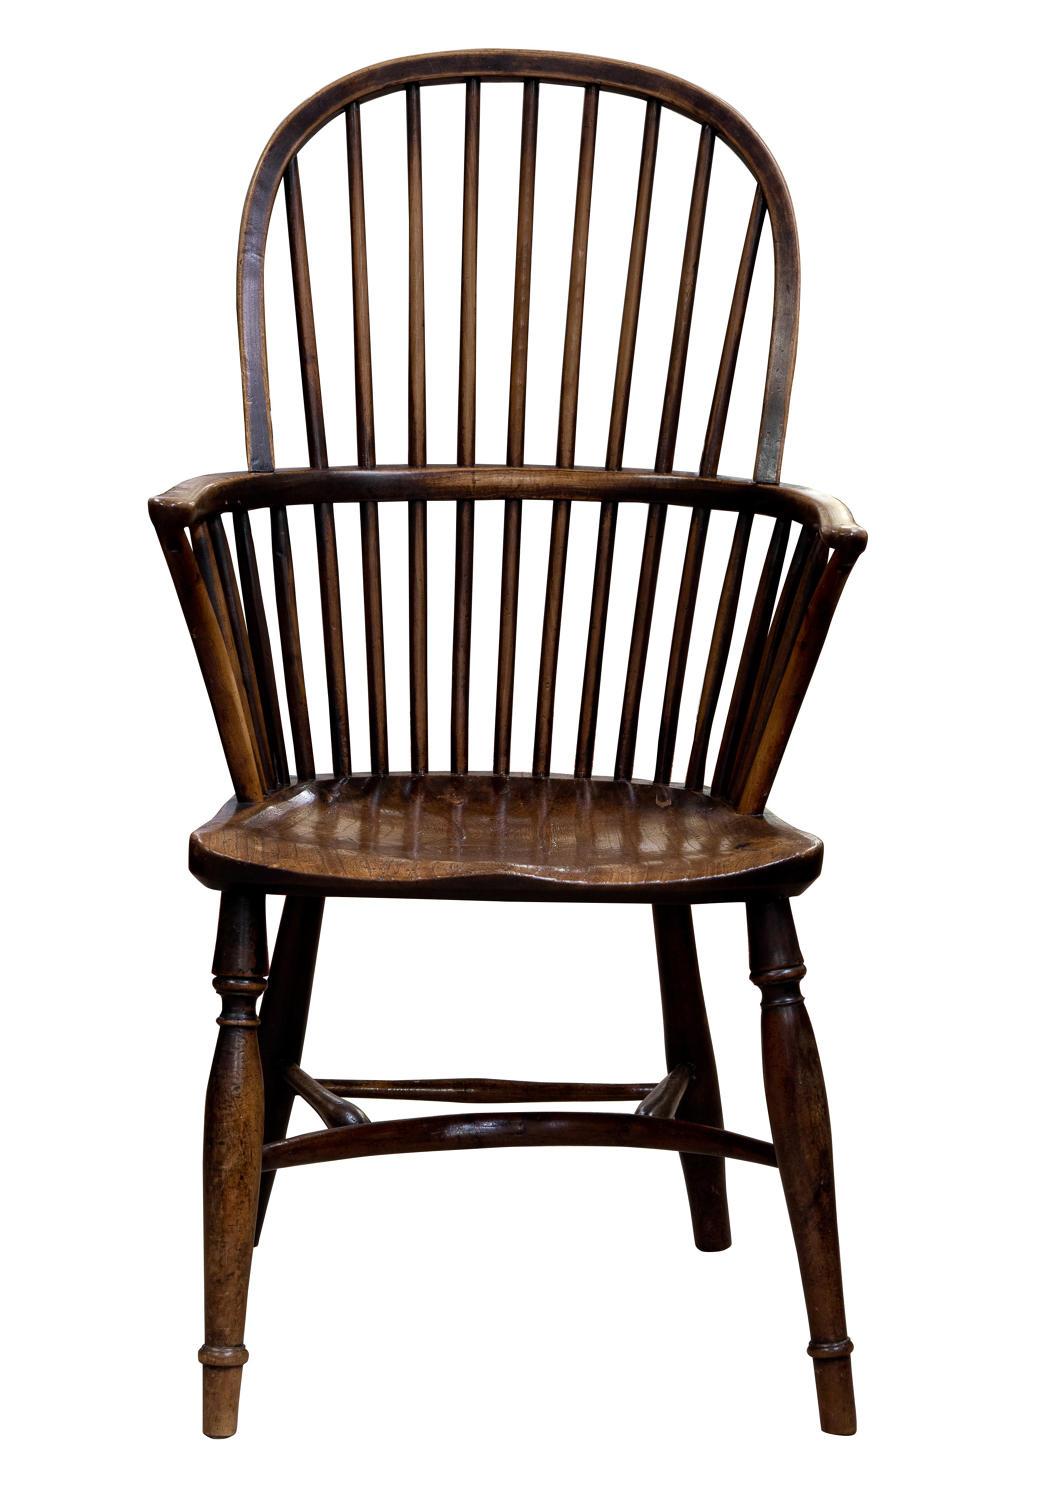 An ash and elm hoopstick back windsor chair with crinoline stretcher,

circa 1830.